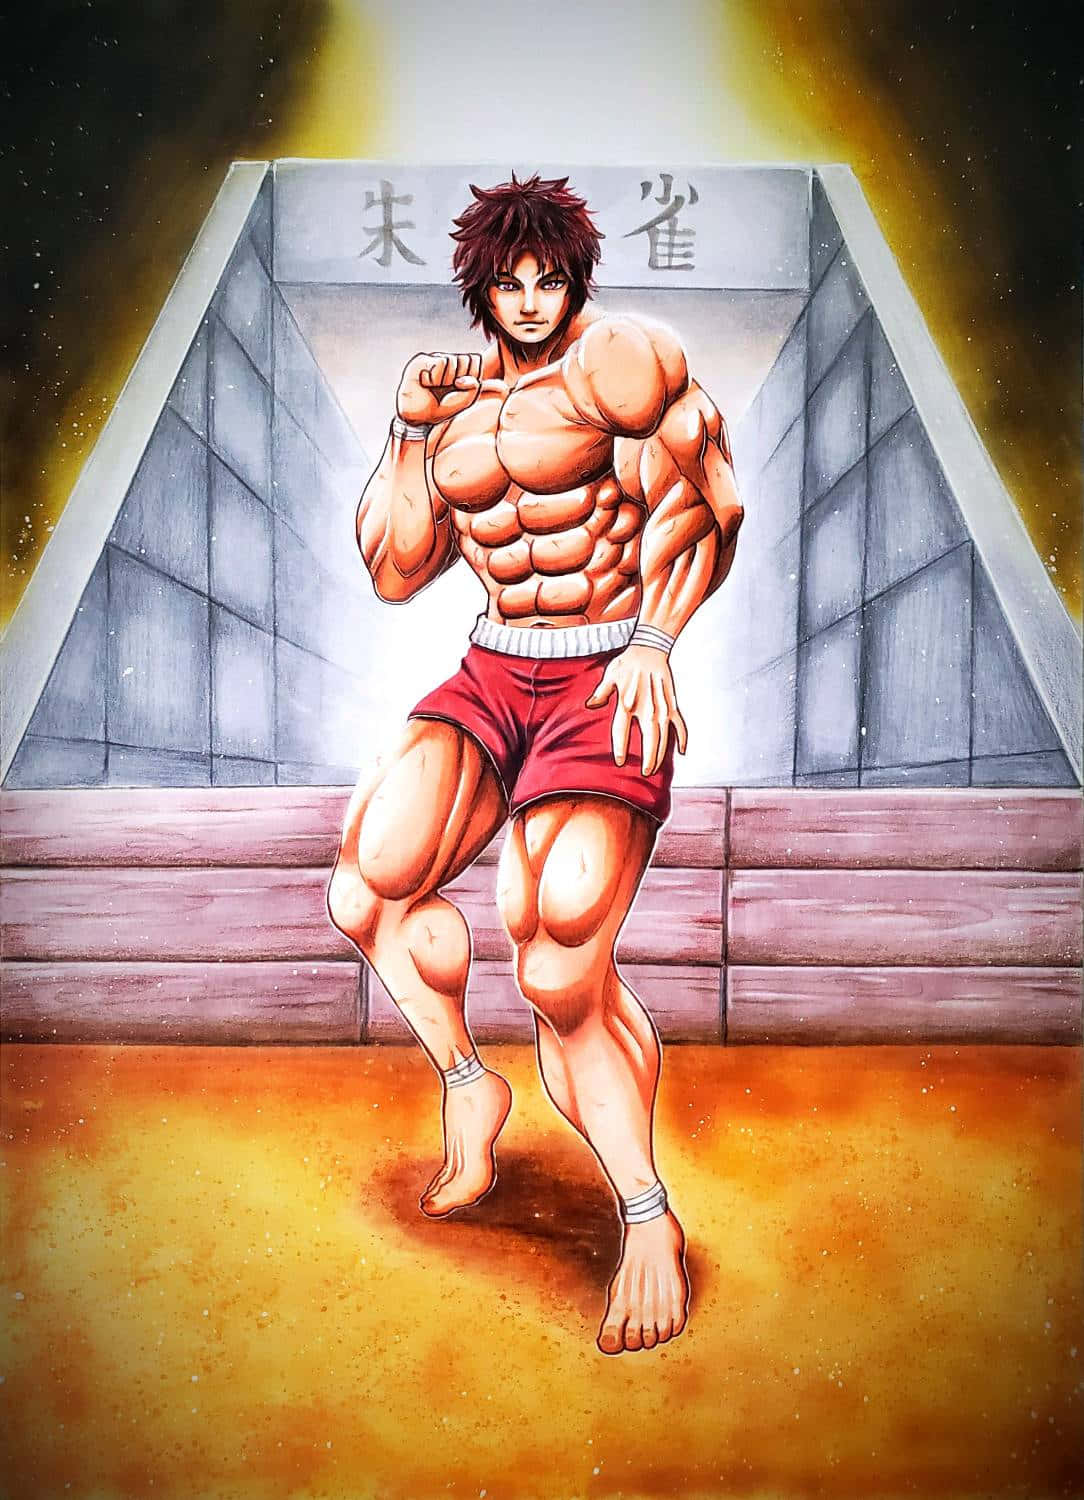 Baki Hanma training to become the strongest